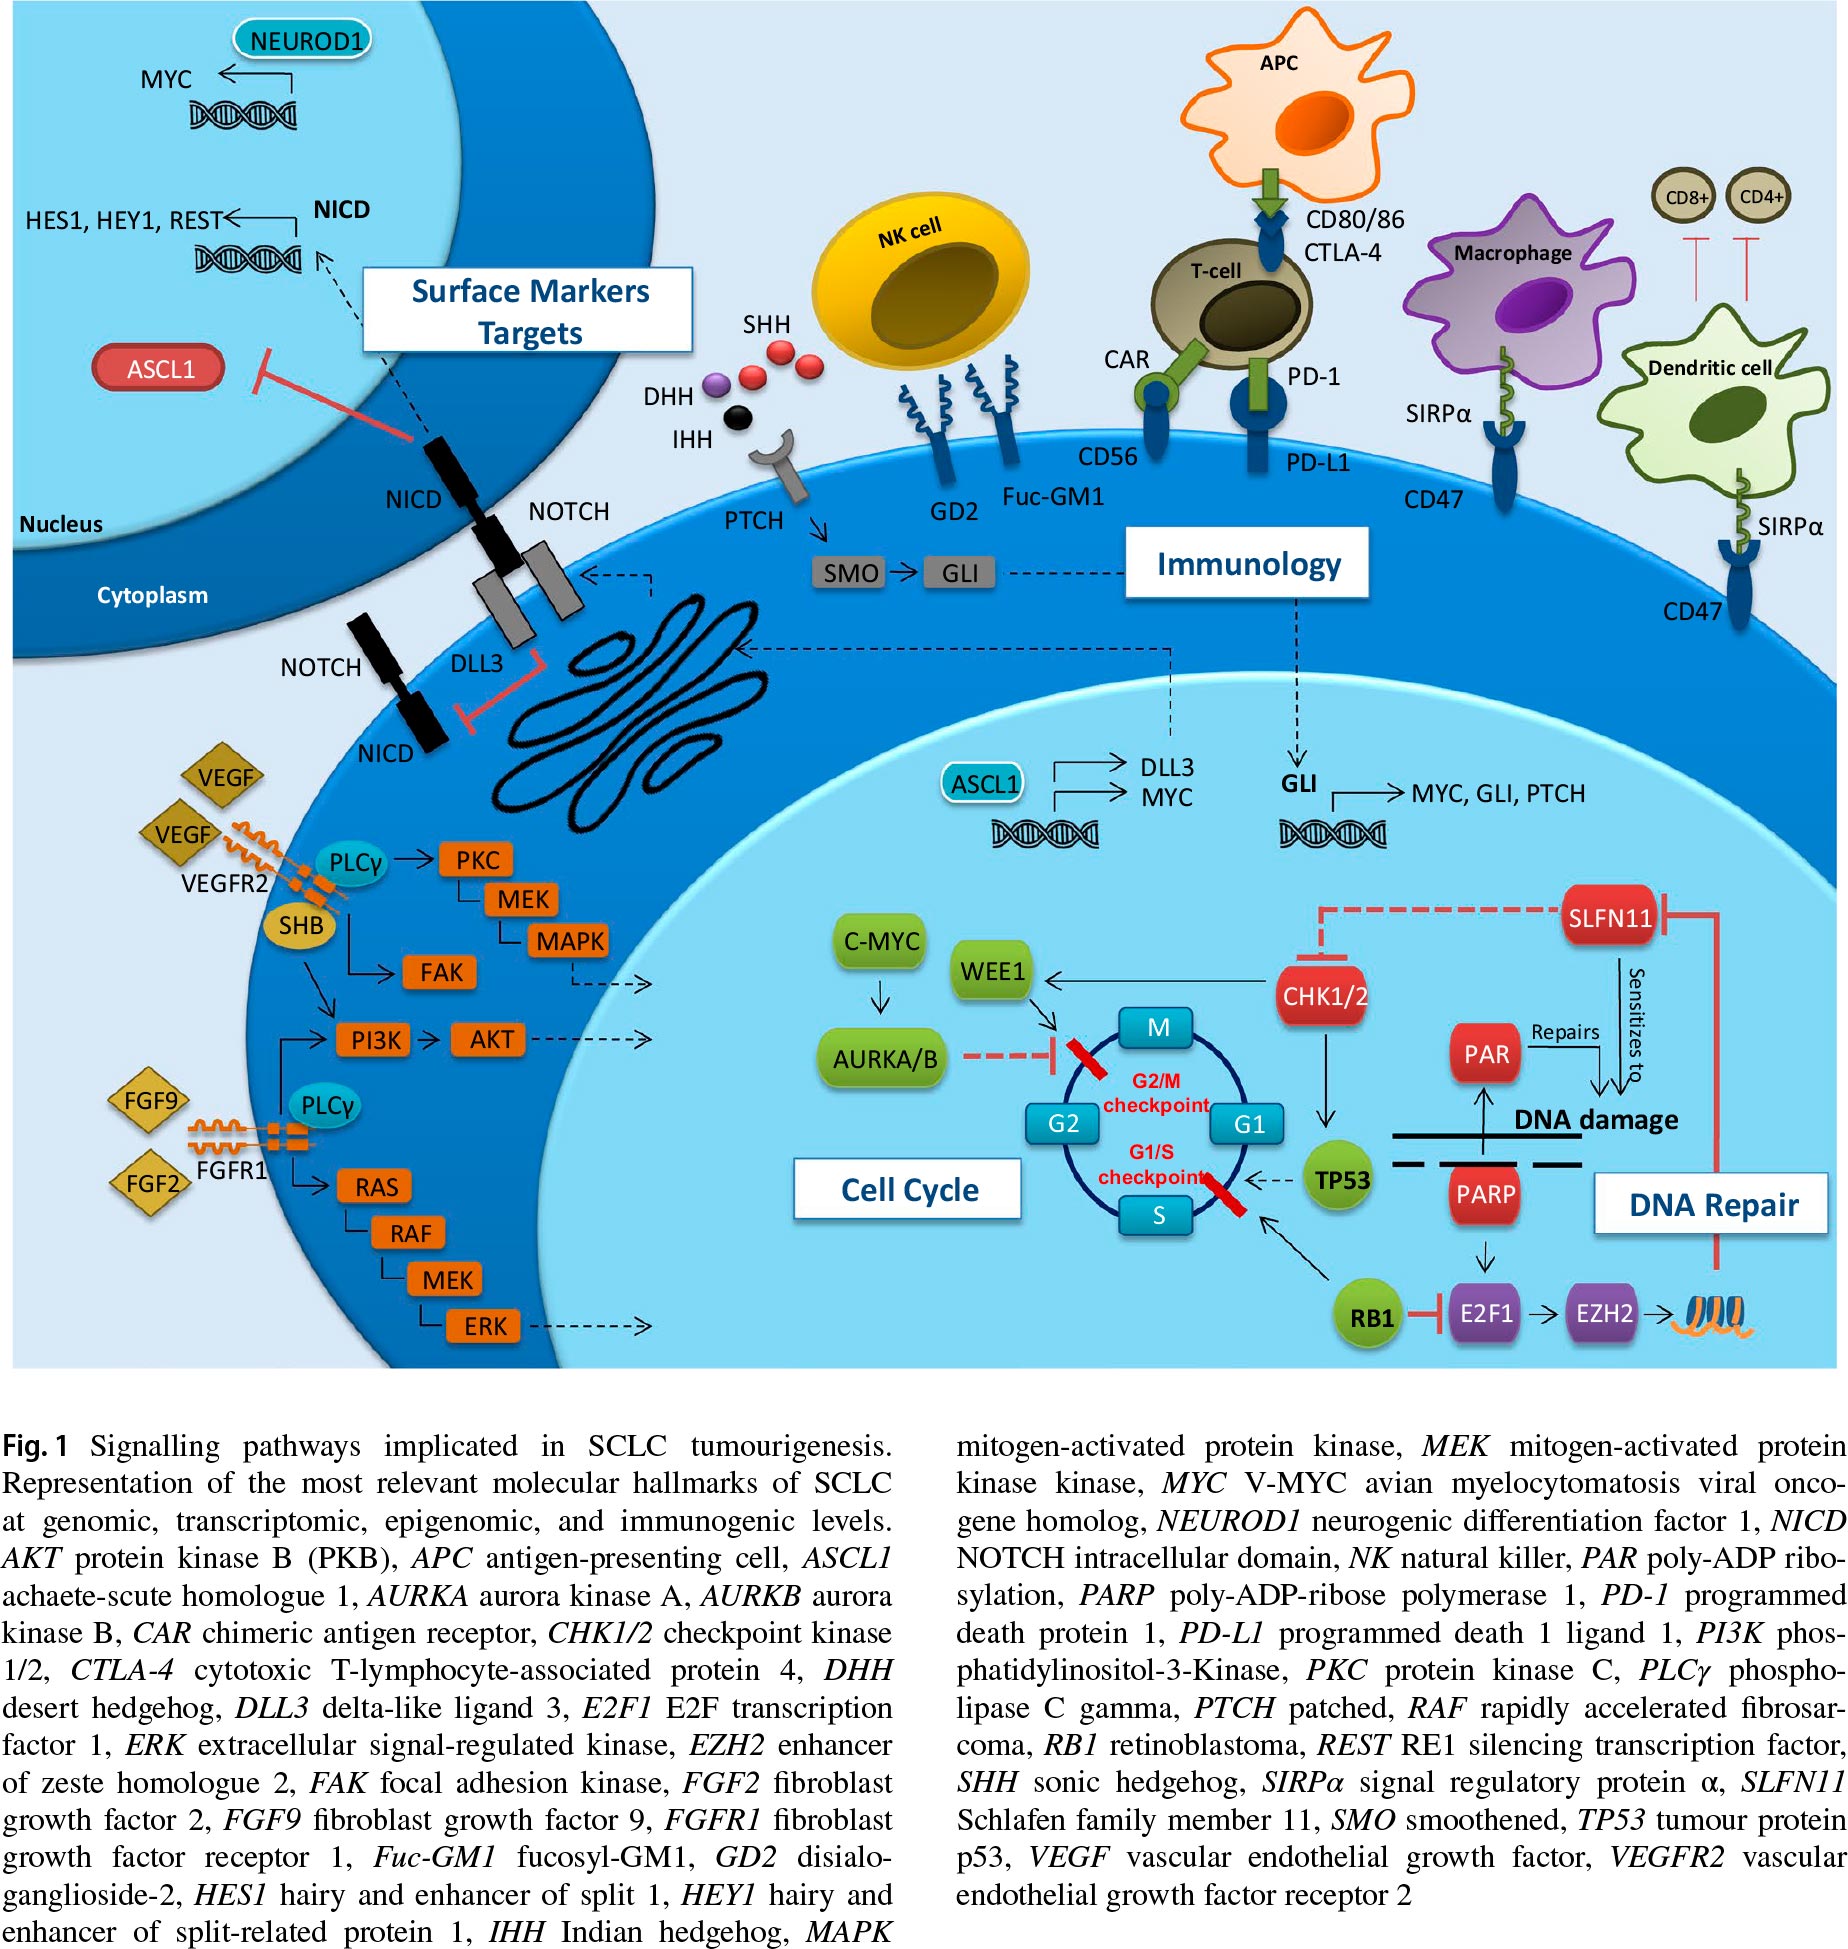 sclc signalling pathways - Small Cell Lung Cancer: Let Immunotherapy Help!